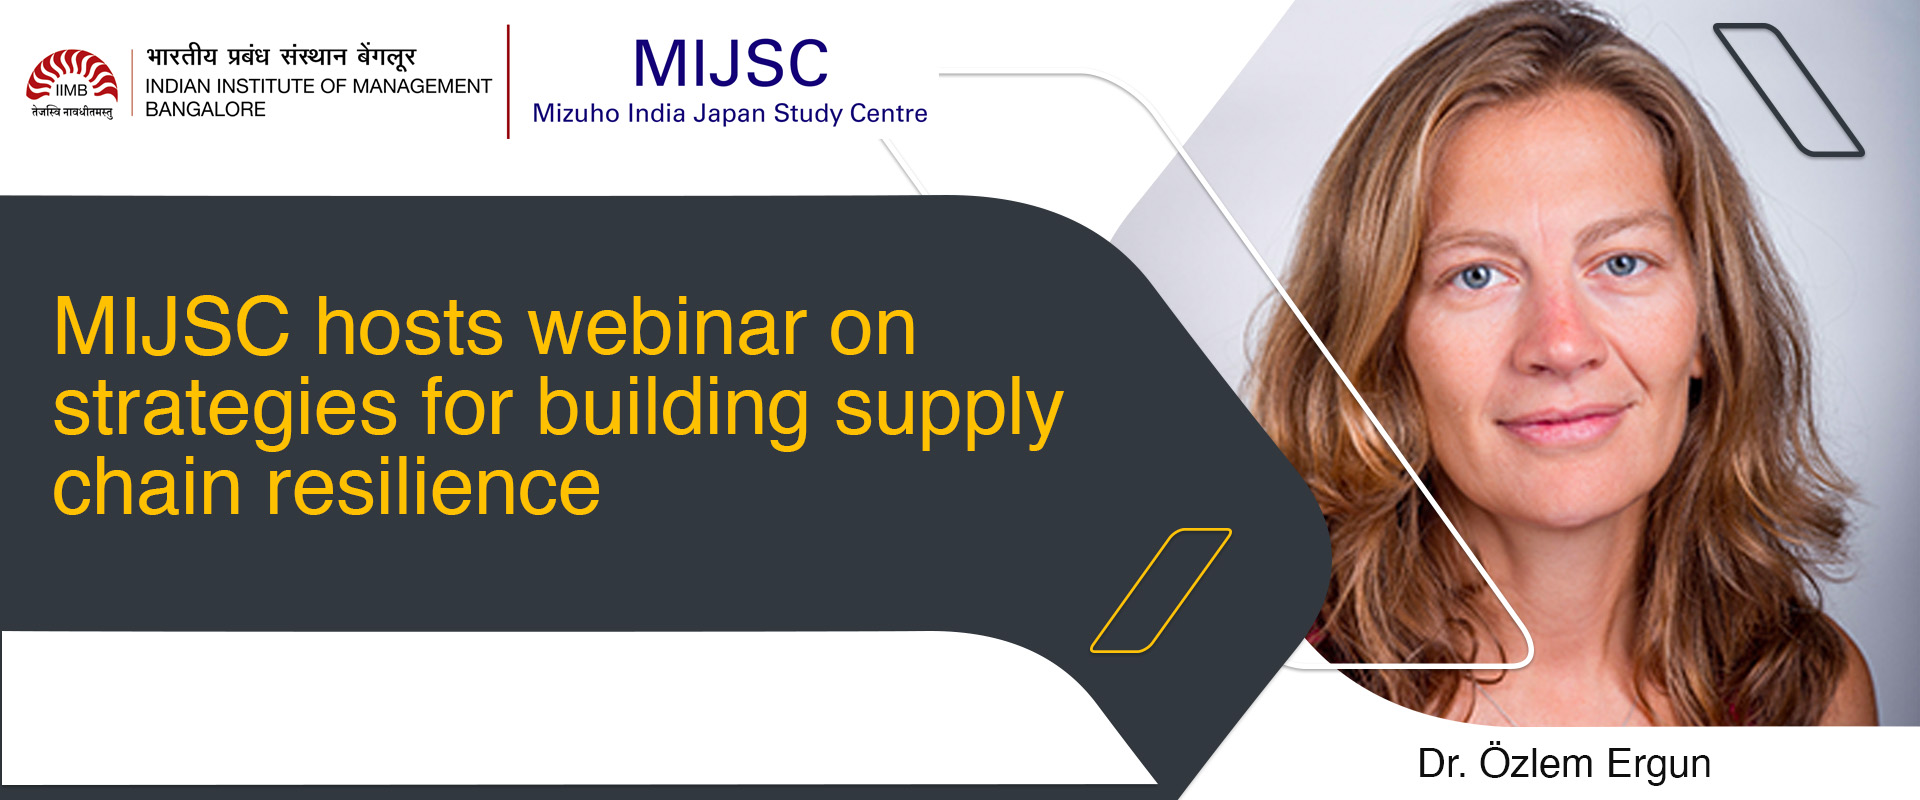 MIJSC hosts webinar on strategies for building supply chain resilience